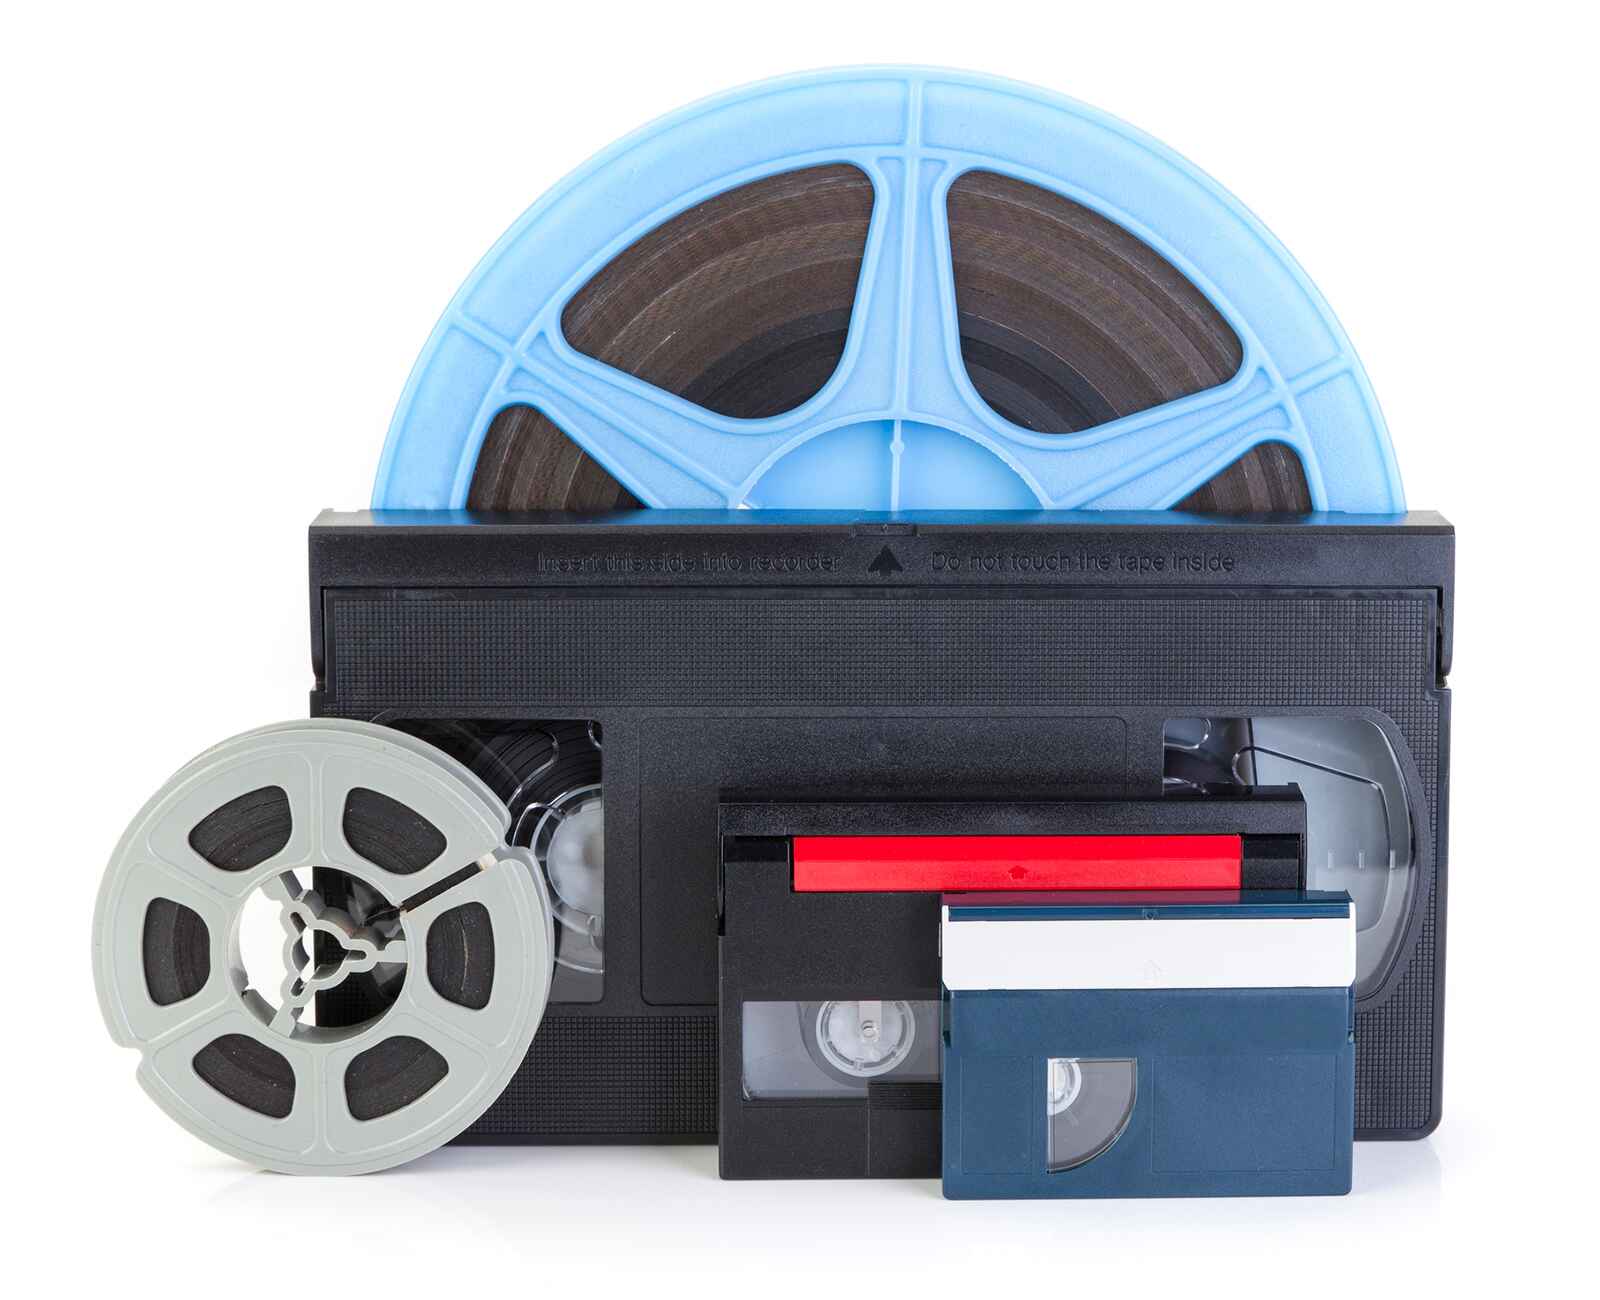 8mm/16mm Film Transfer - Film to DVD Transfer, Slide Transfer, Photo  Scanning and Video Tape to Digital Conversion